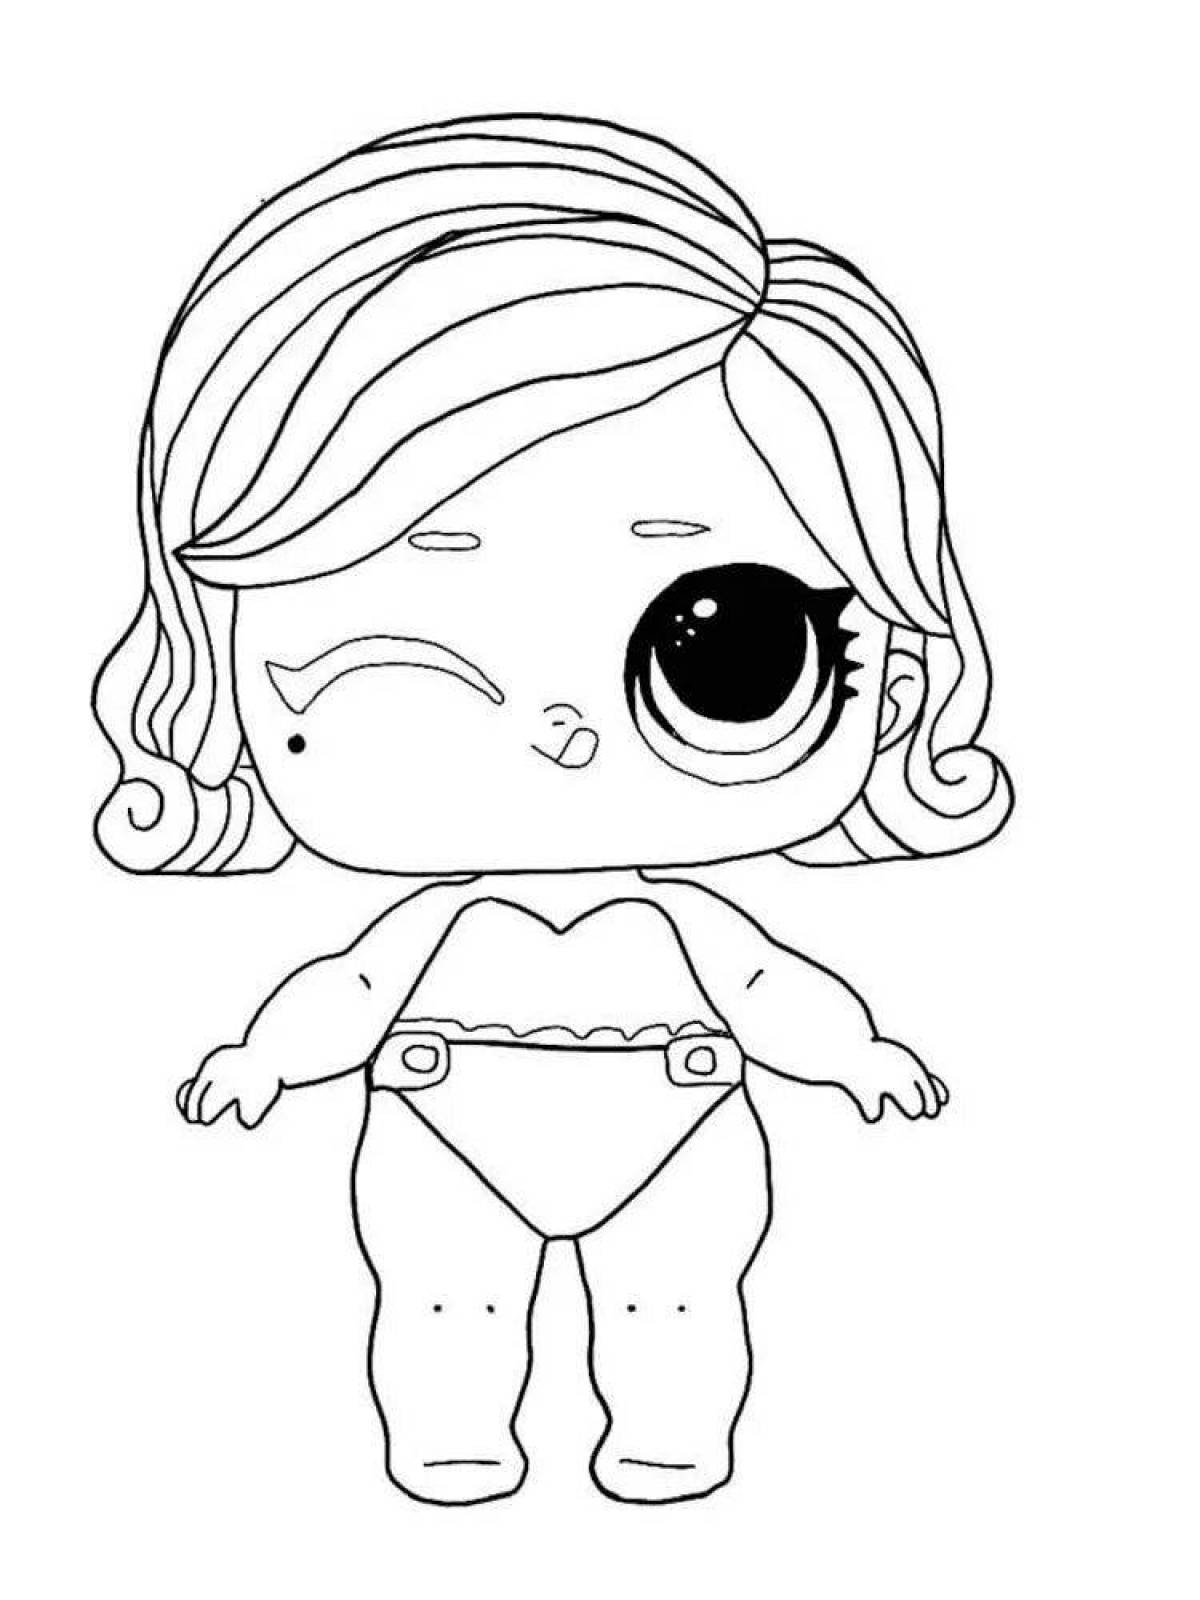 Charming lol baby doll coloring book